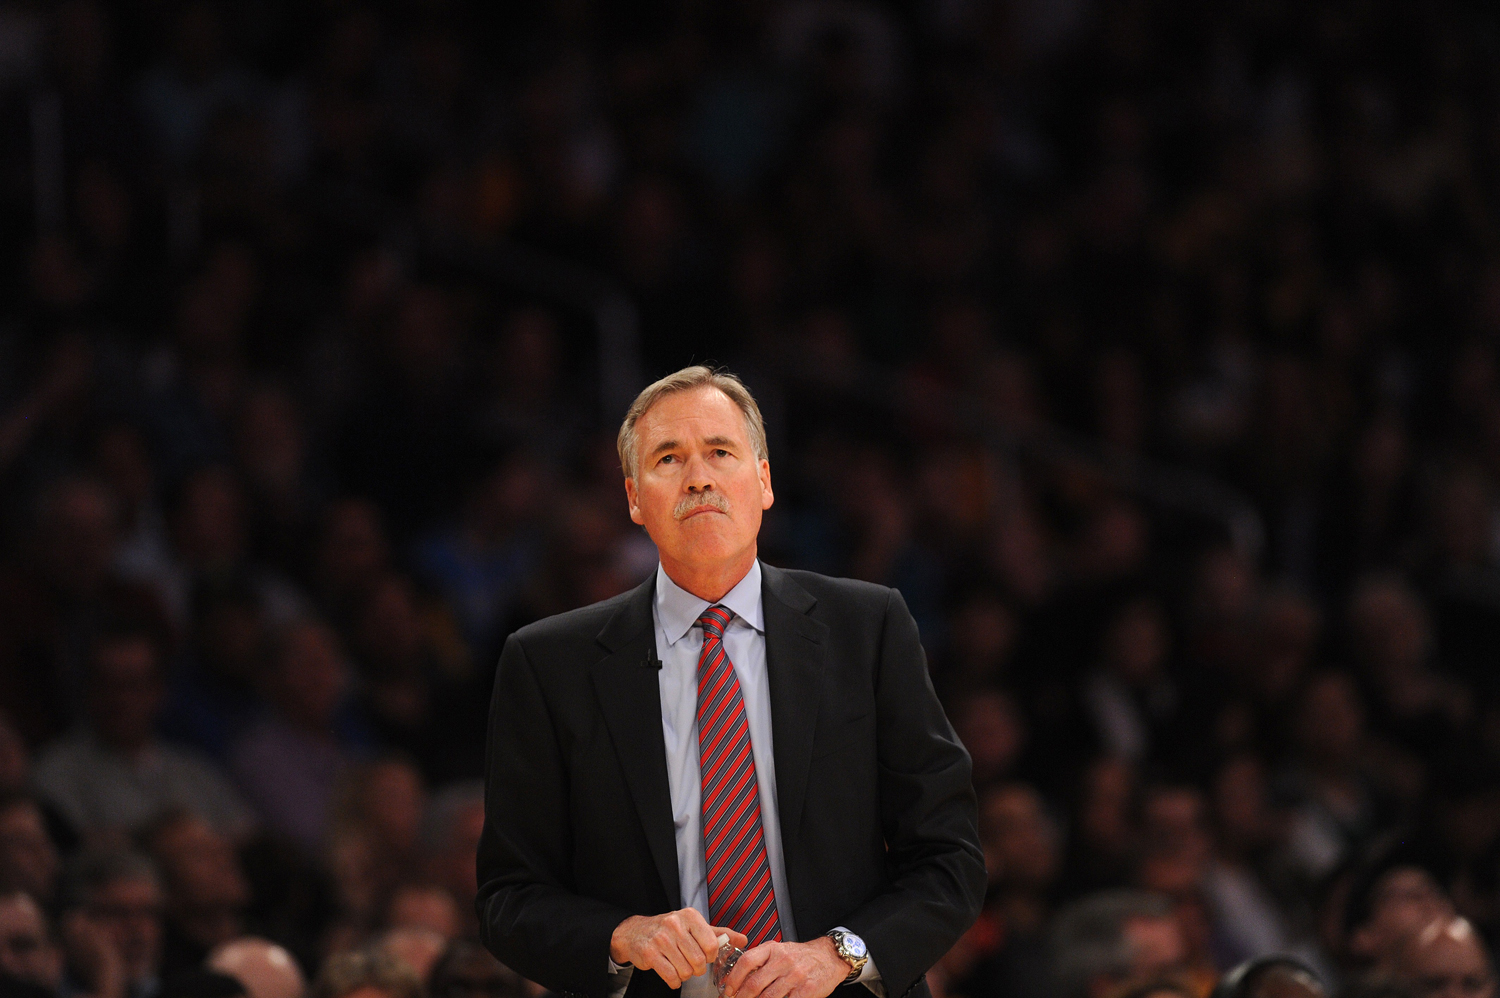 Mike D'Antoni watches from the sidelines during the NBA game between the Los Angeles Lakers and the Boston Celtics at the Staples Center in Los Angeles on Feb. 21, 2014 (Robyn Beck—AFP/Getty Images)